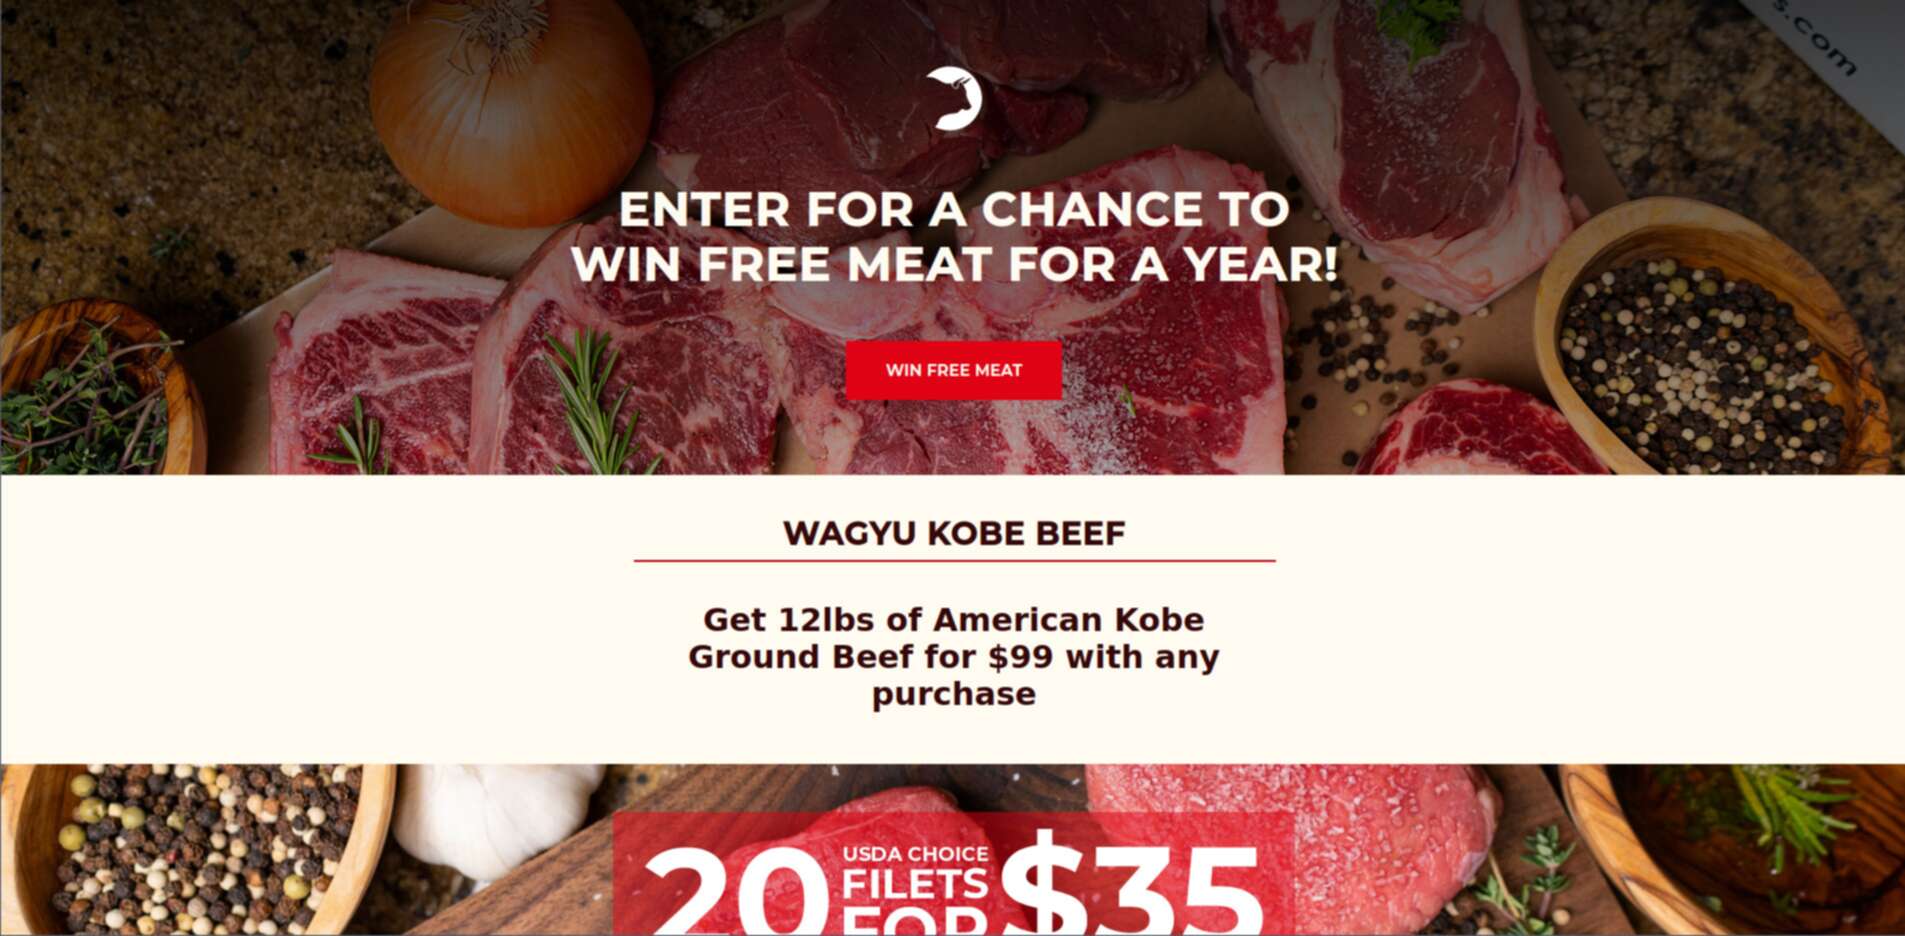 Screenshot of Good Ranchers menu SPA hero section featuring offers for 'free meat for a year' and a promo for wagyu beef